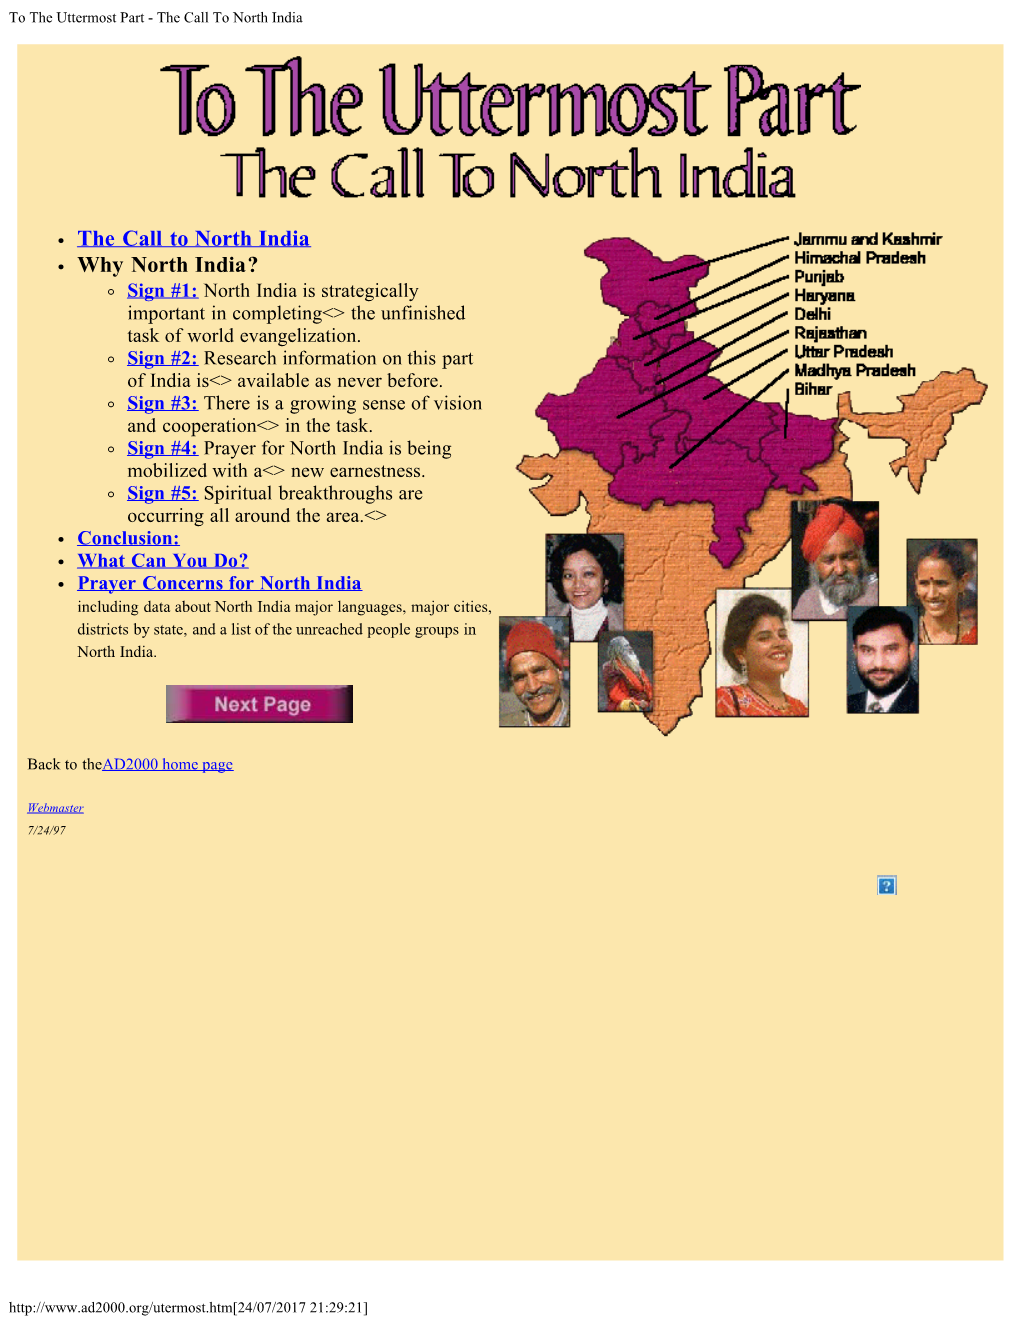 The Call to North India Why North India?